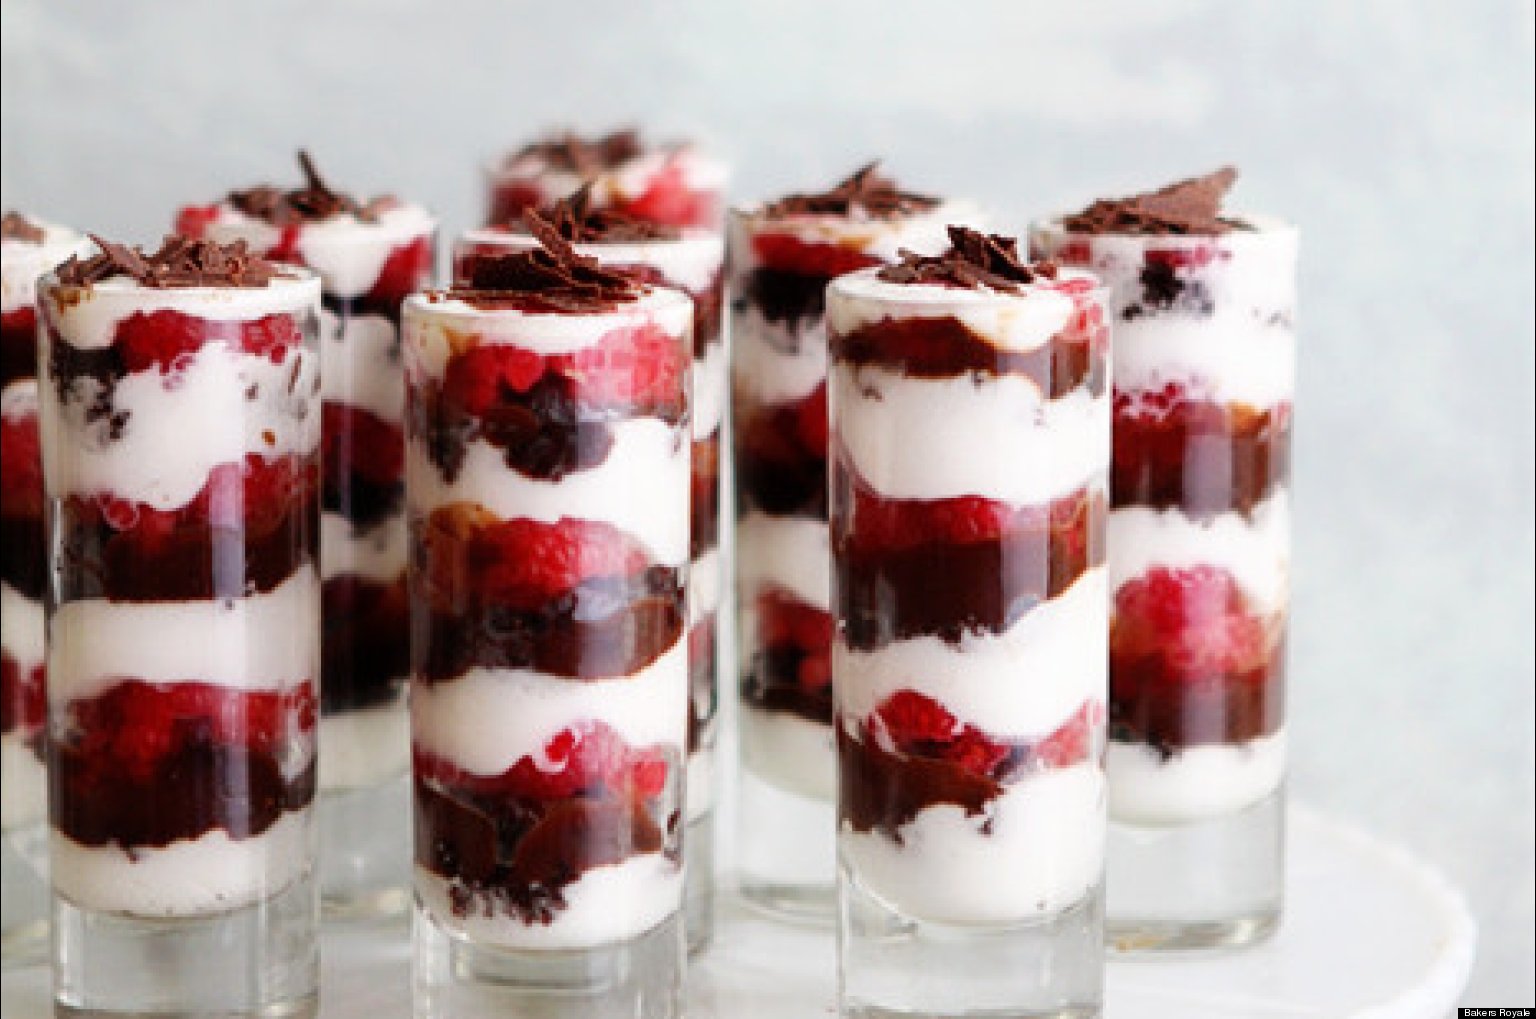 Best-dessert-recipes-for-your-valentines